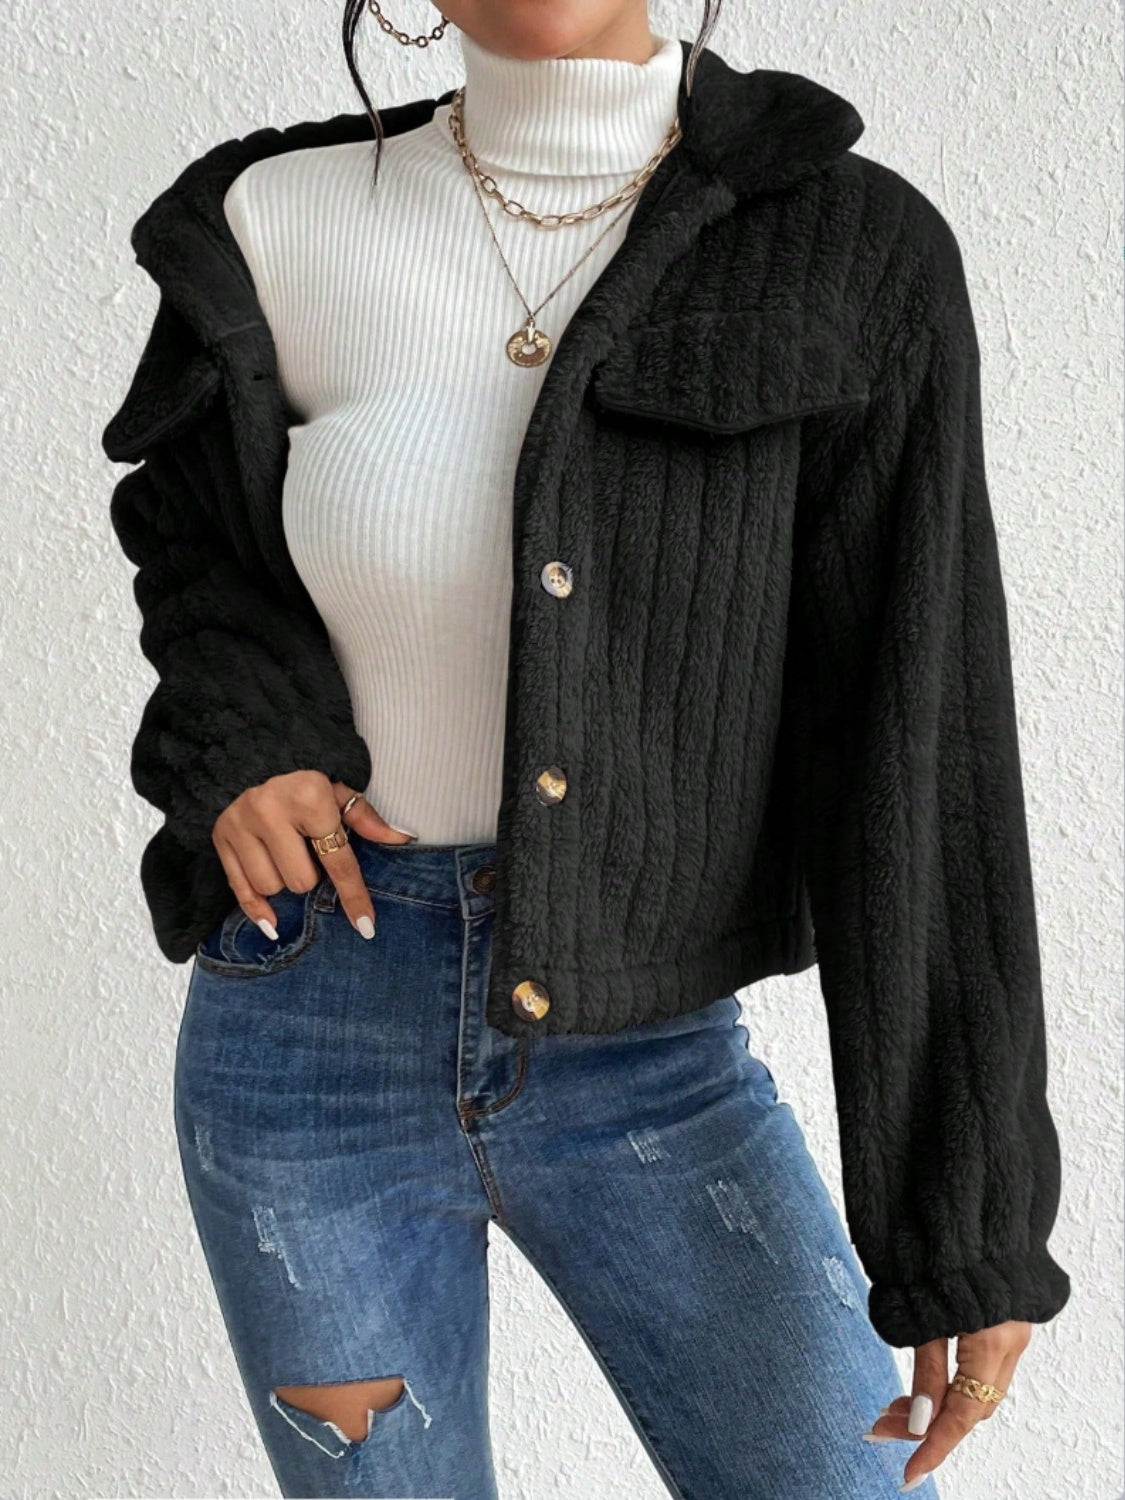 Women's Fuzzy Jacket with Buttons  Button Up Collared Neck Jacket